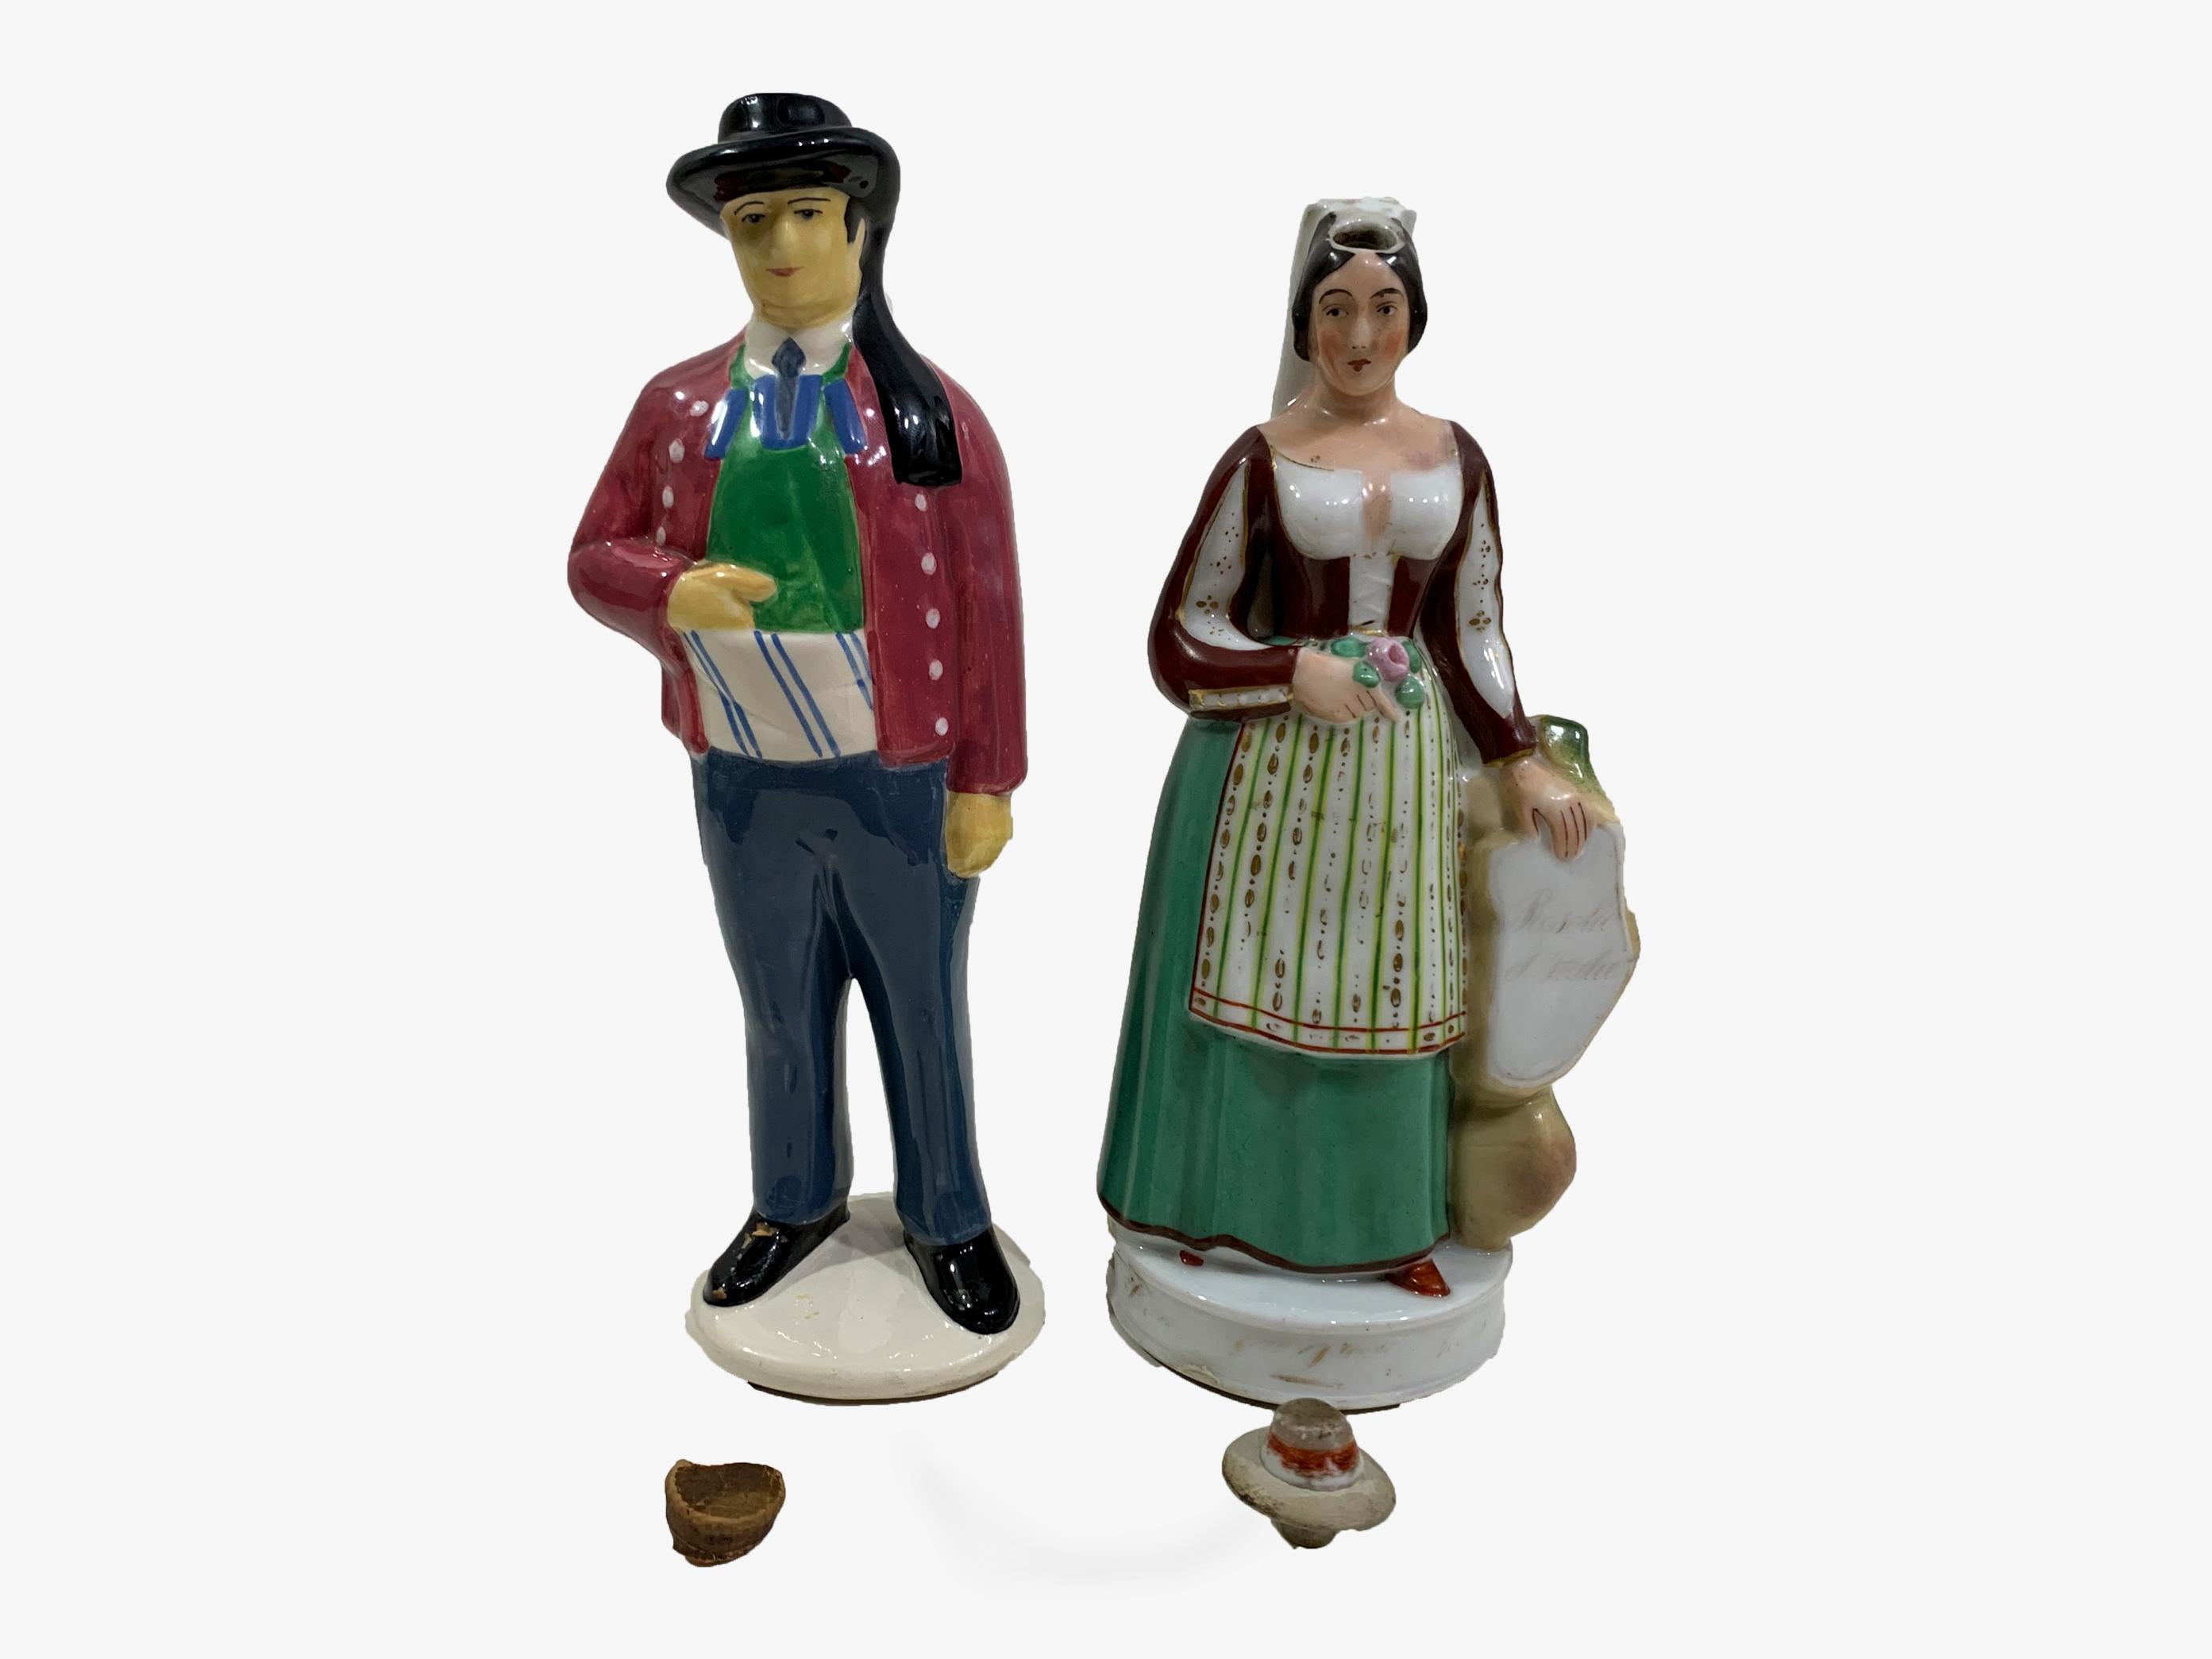 A set of 2 Vintage Henriot Quimper Handpainted Liquor Bottle Figurine Couple
Made from polychrome enameled porcelain with a cork stopper.
A figural man and woman in traditional European garb. He wears a black hat, red jacket and blue and green suit;